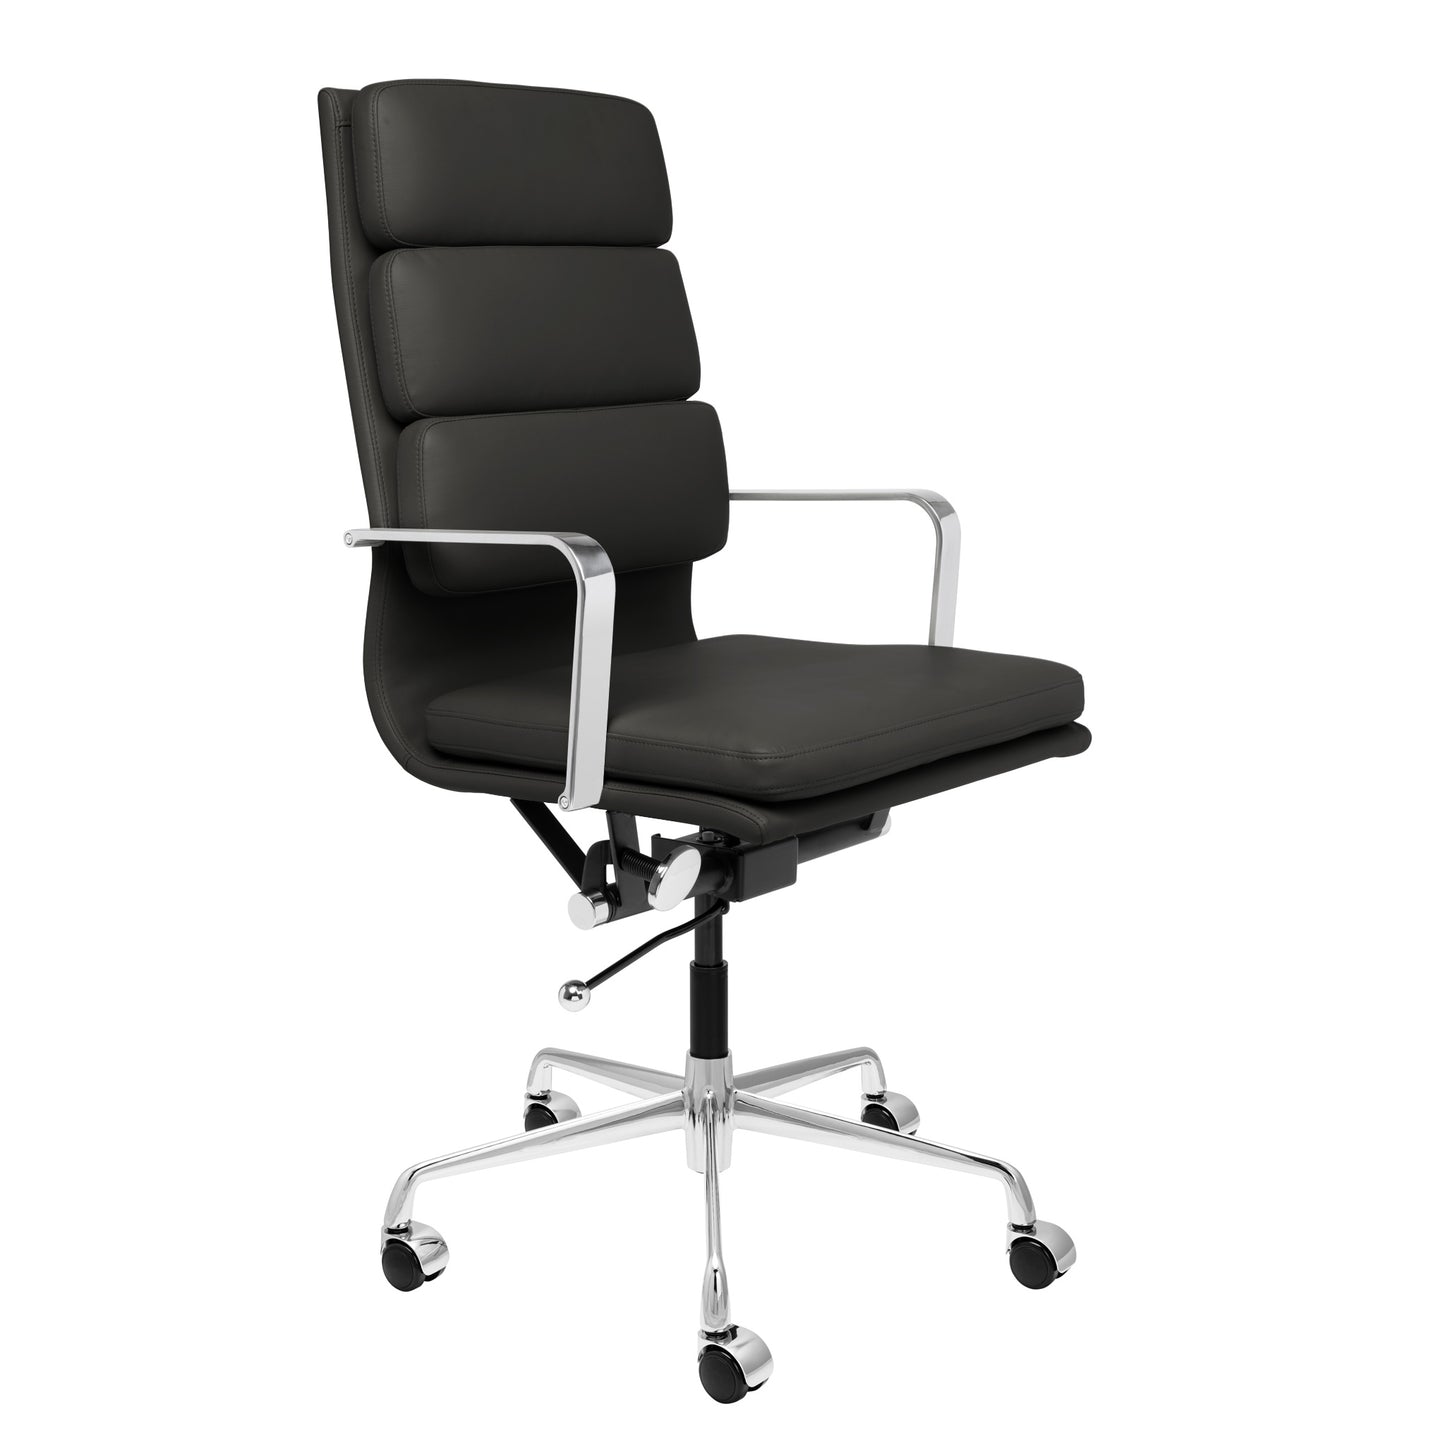 SOFT PAD CHAIR EA 219 Upholstered leather office chair with 5